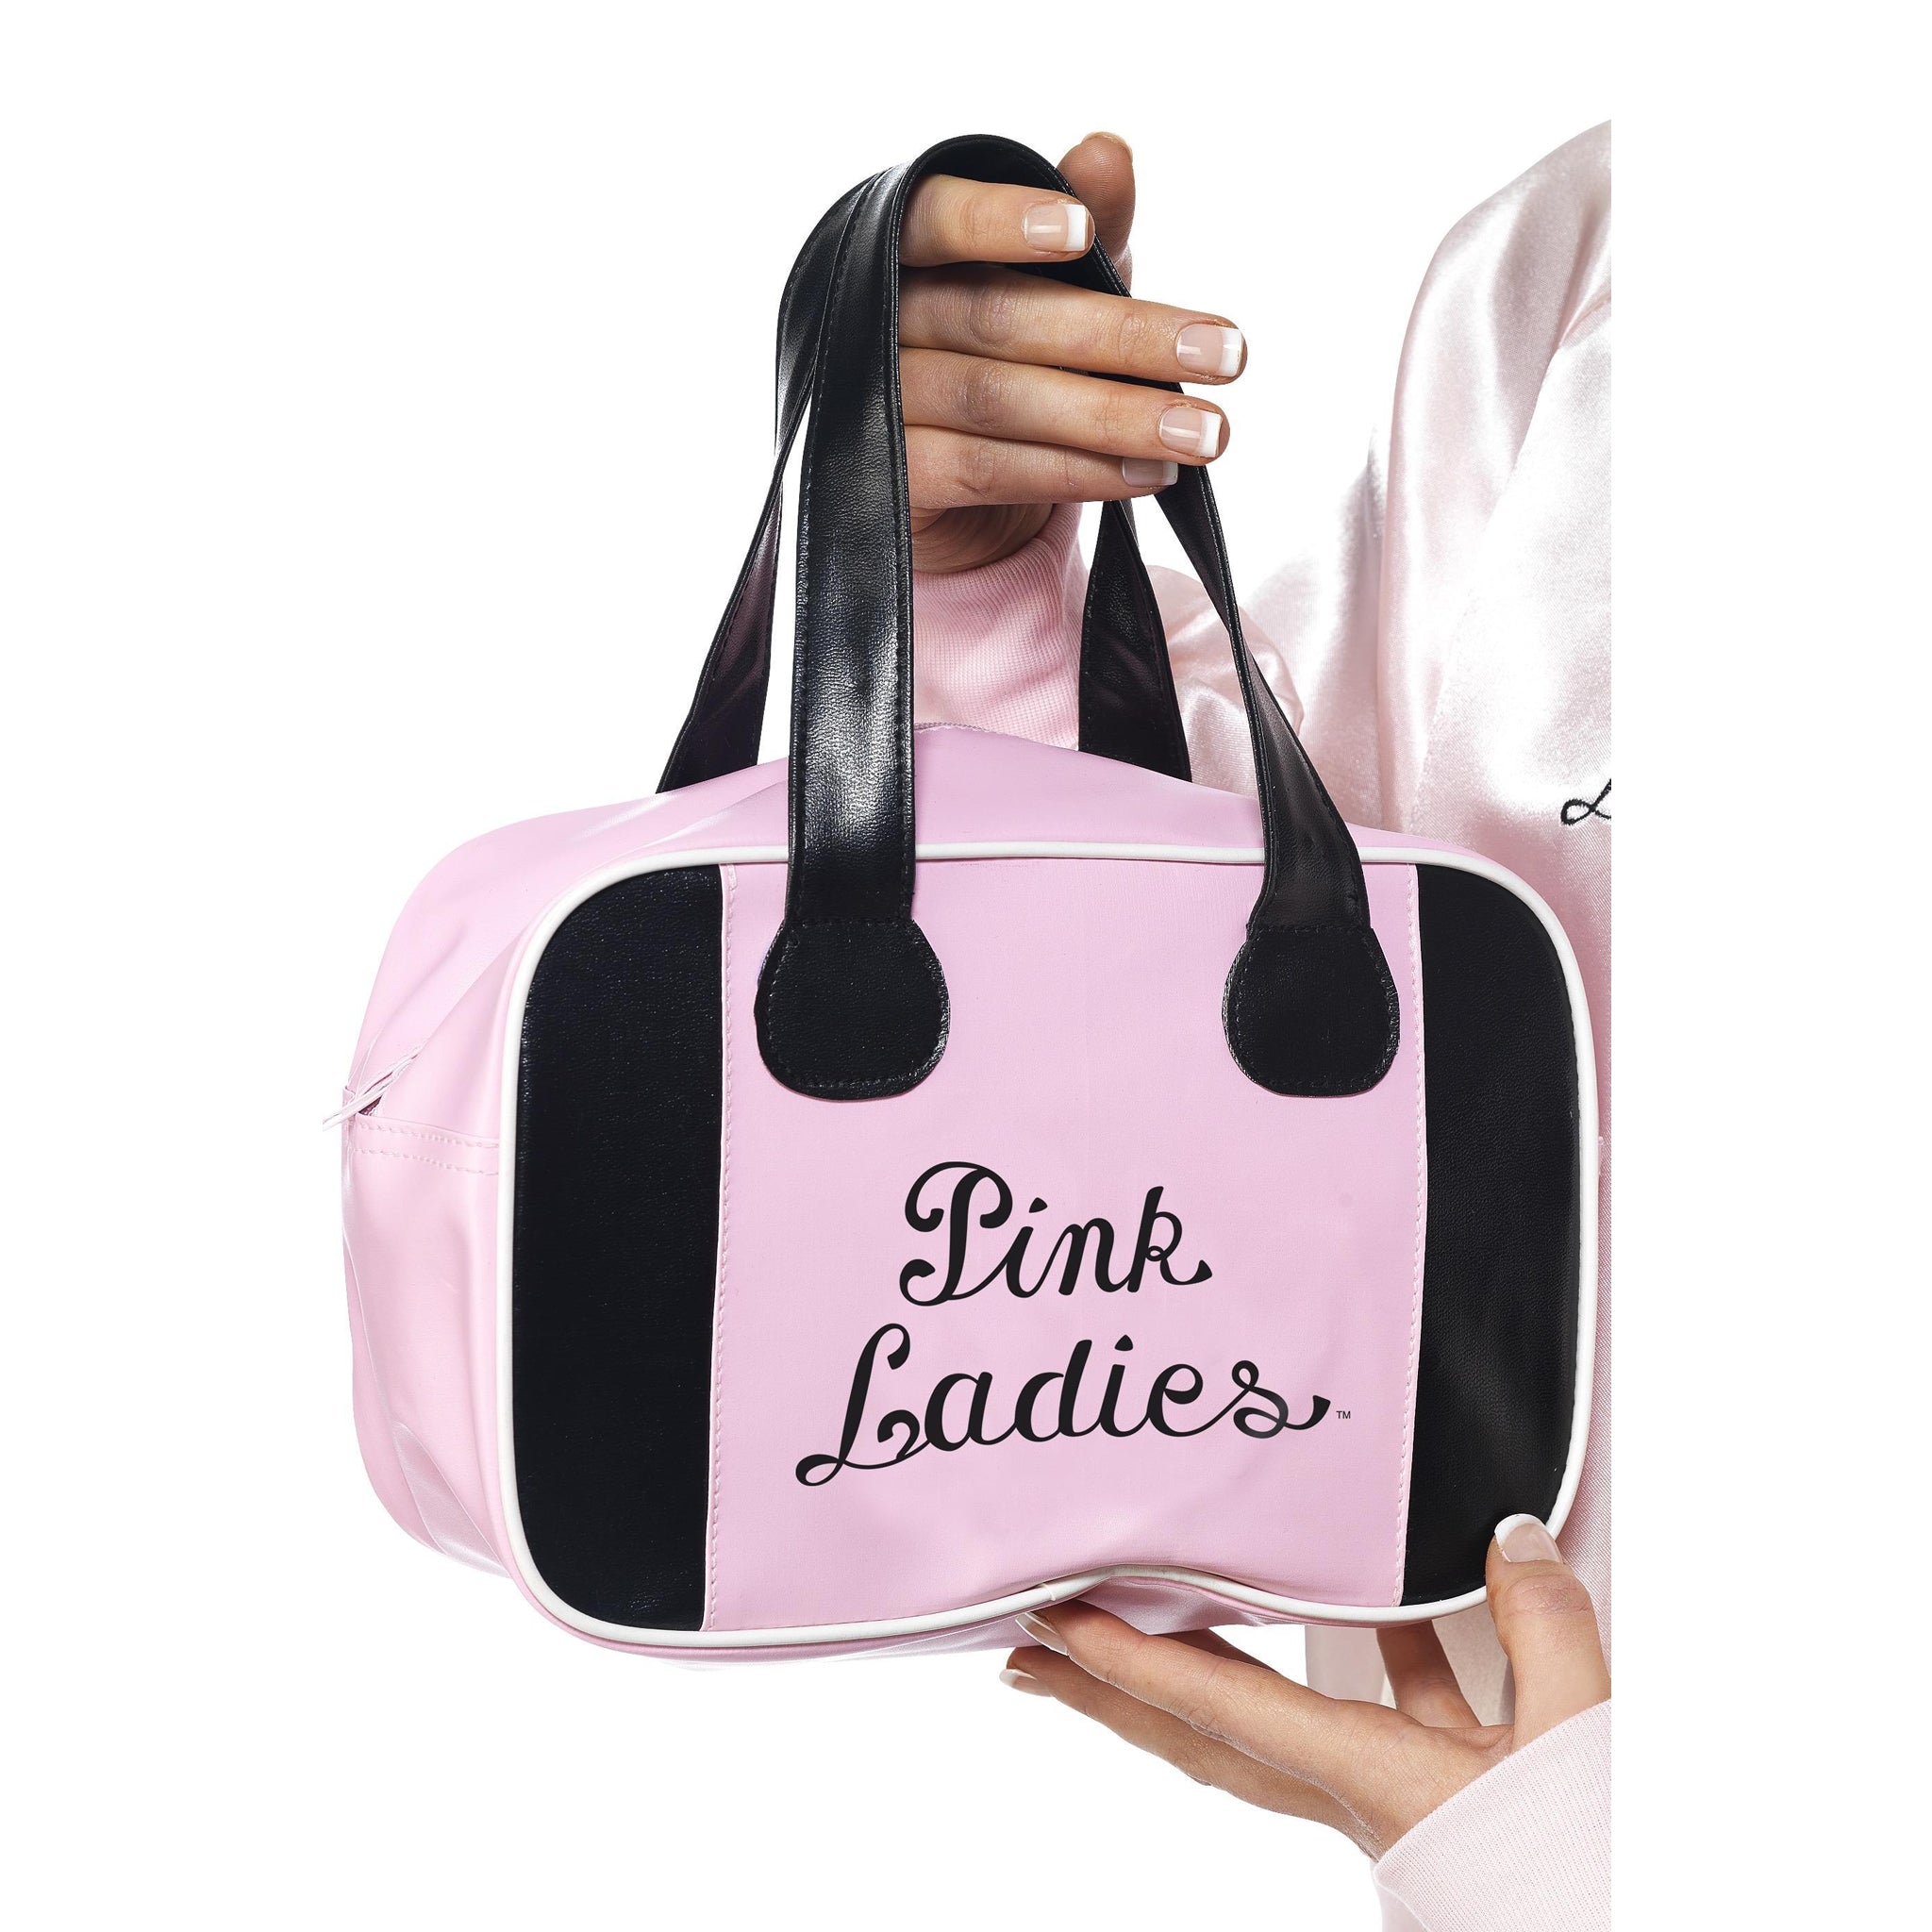 Pink and black Pink Ladies bowling bag with text